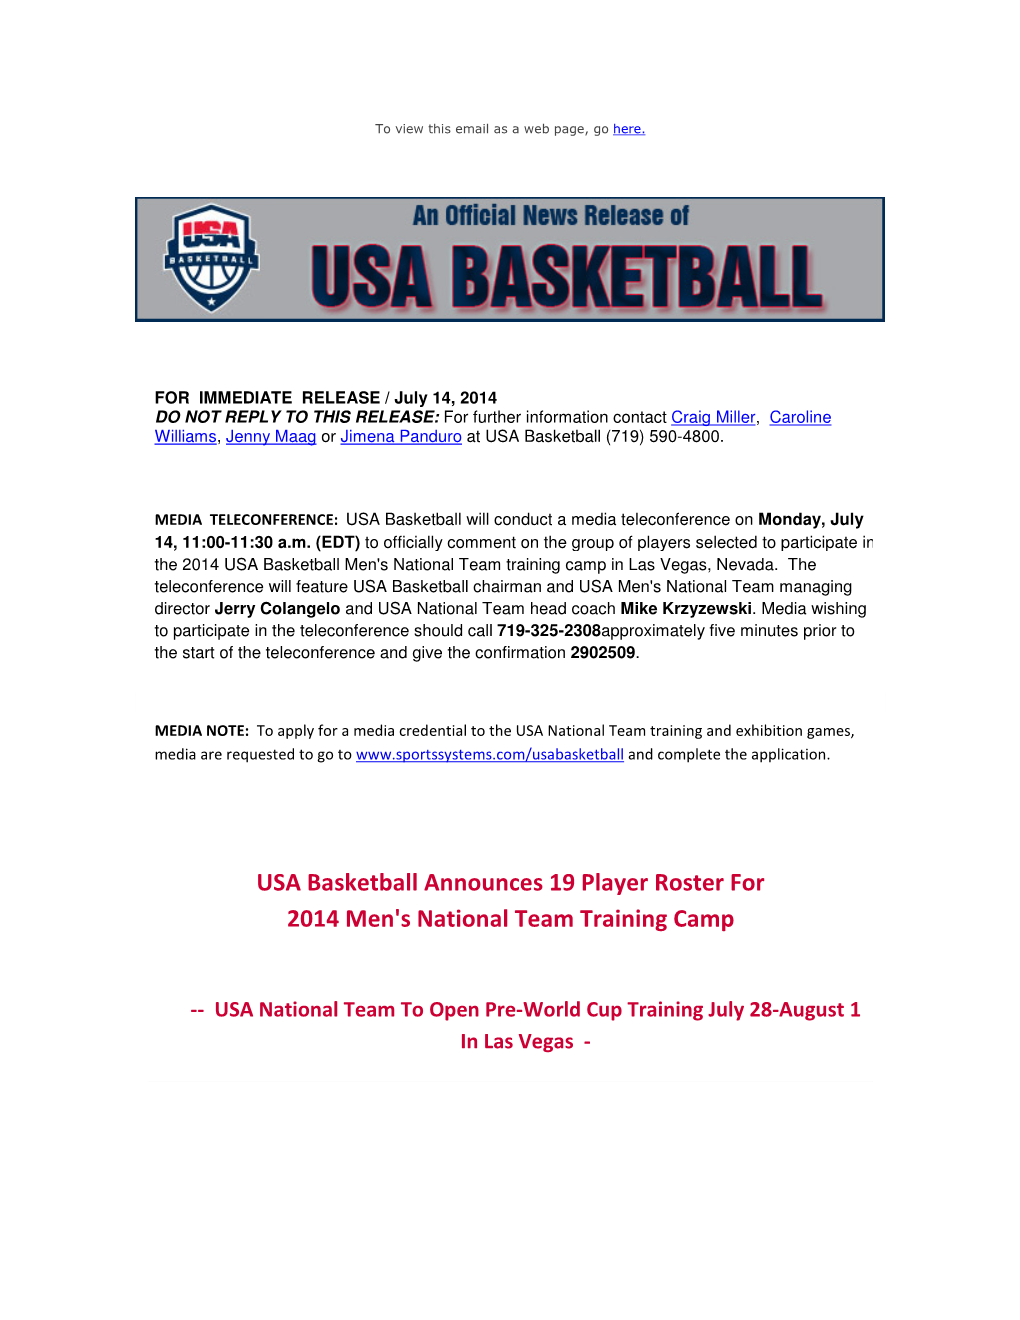 USA Basketball Announces 19 Player Roster for 2014 Men's National Team Training Camp